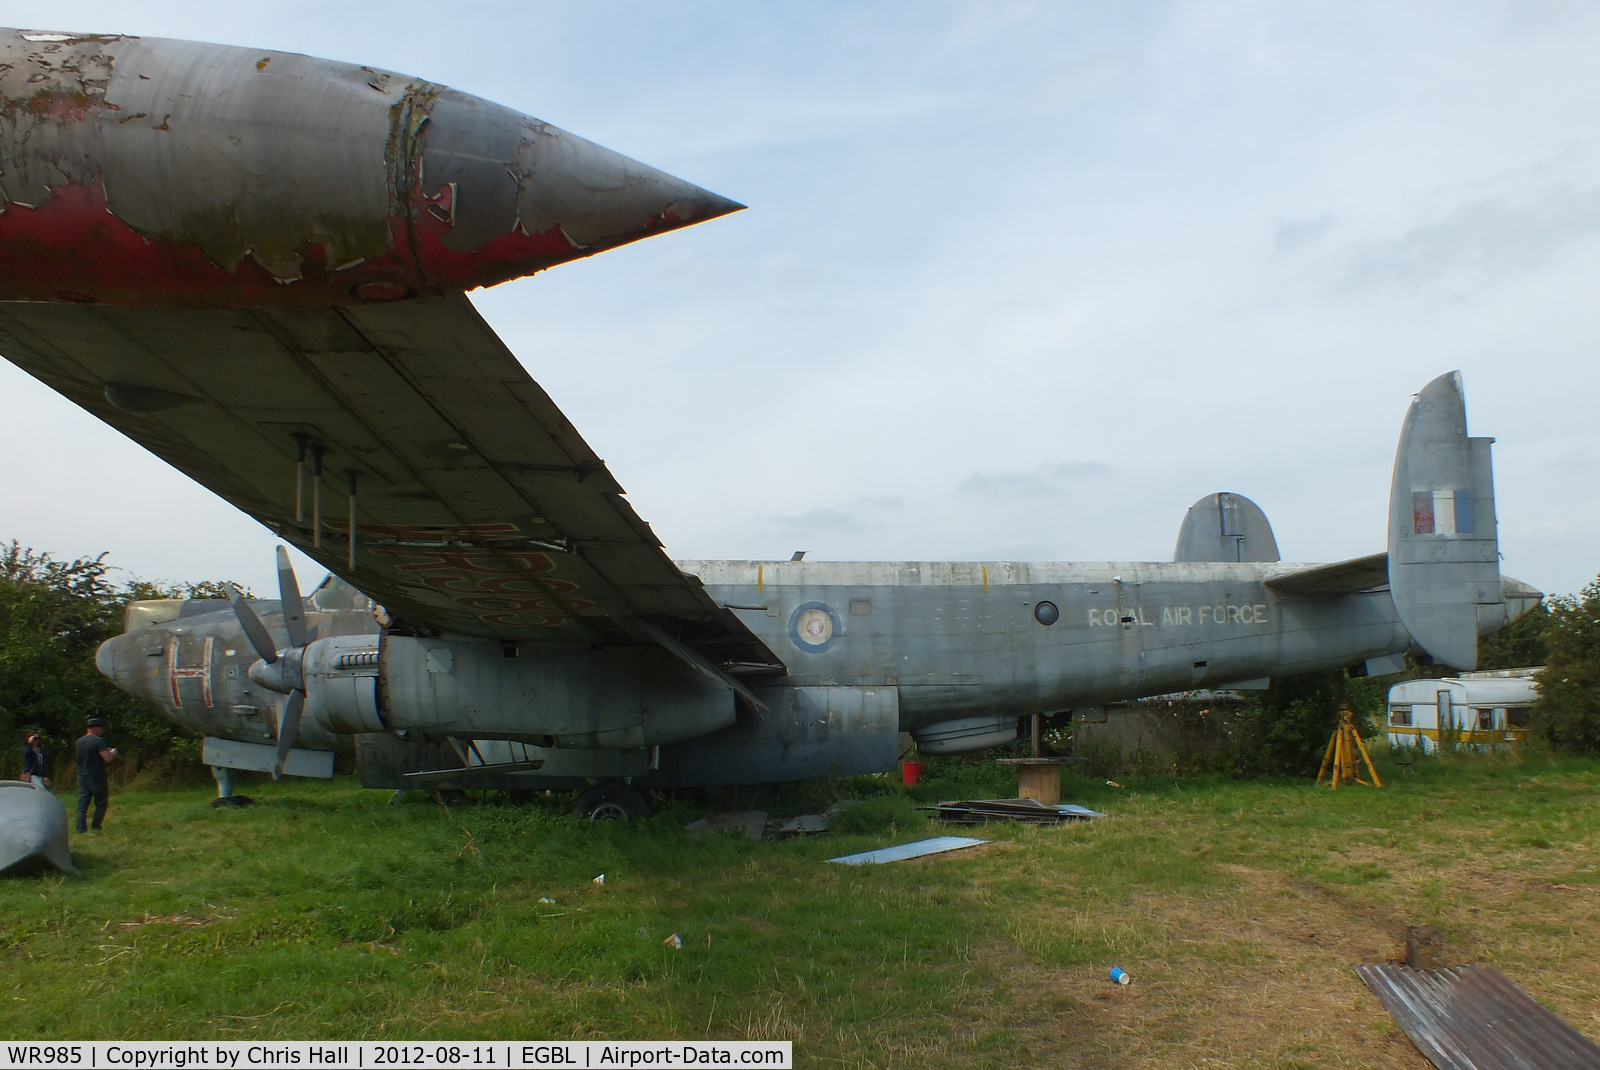 WR985, Avro 716 Shackleton MR.3 C/N Not found WR985, at the defunct Jet Aviation Preservation Group, Long Marston